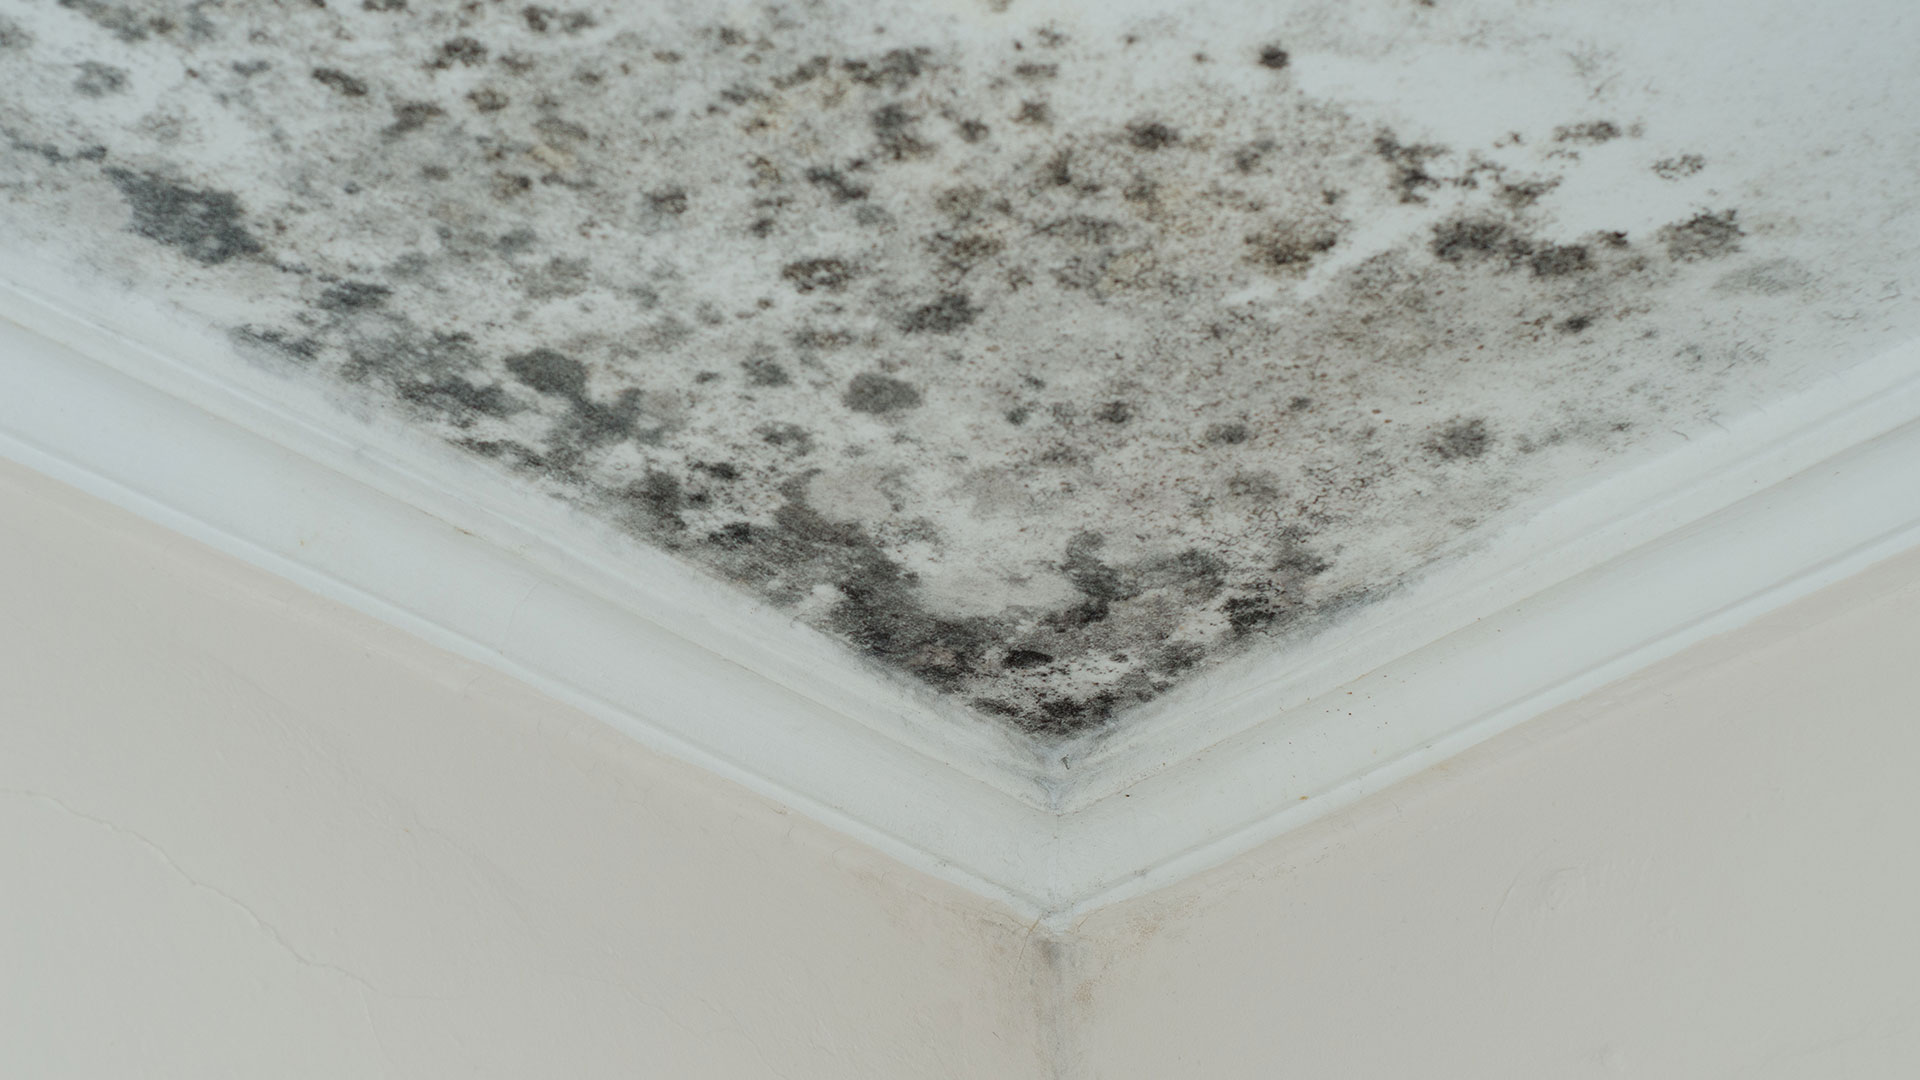 Mold Removal & Remediation services from Shambaugh Cleaning and Restoration in Columbus, Akron, Mansfield Ohio nearby area.